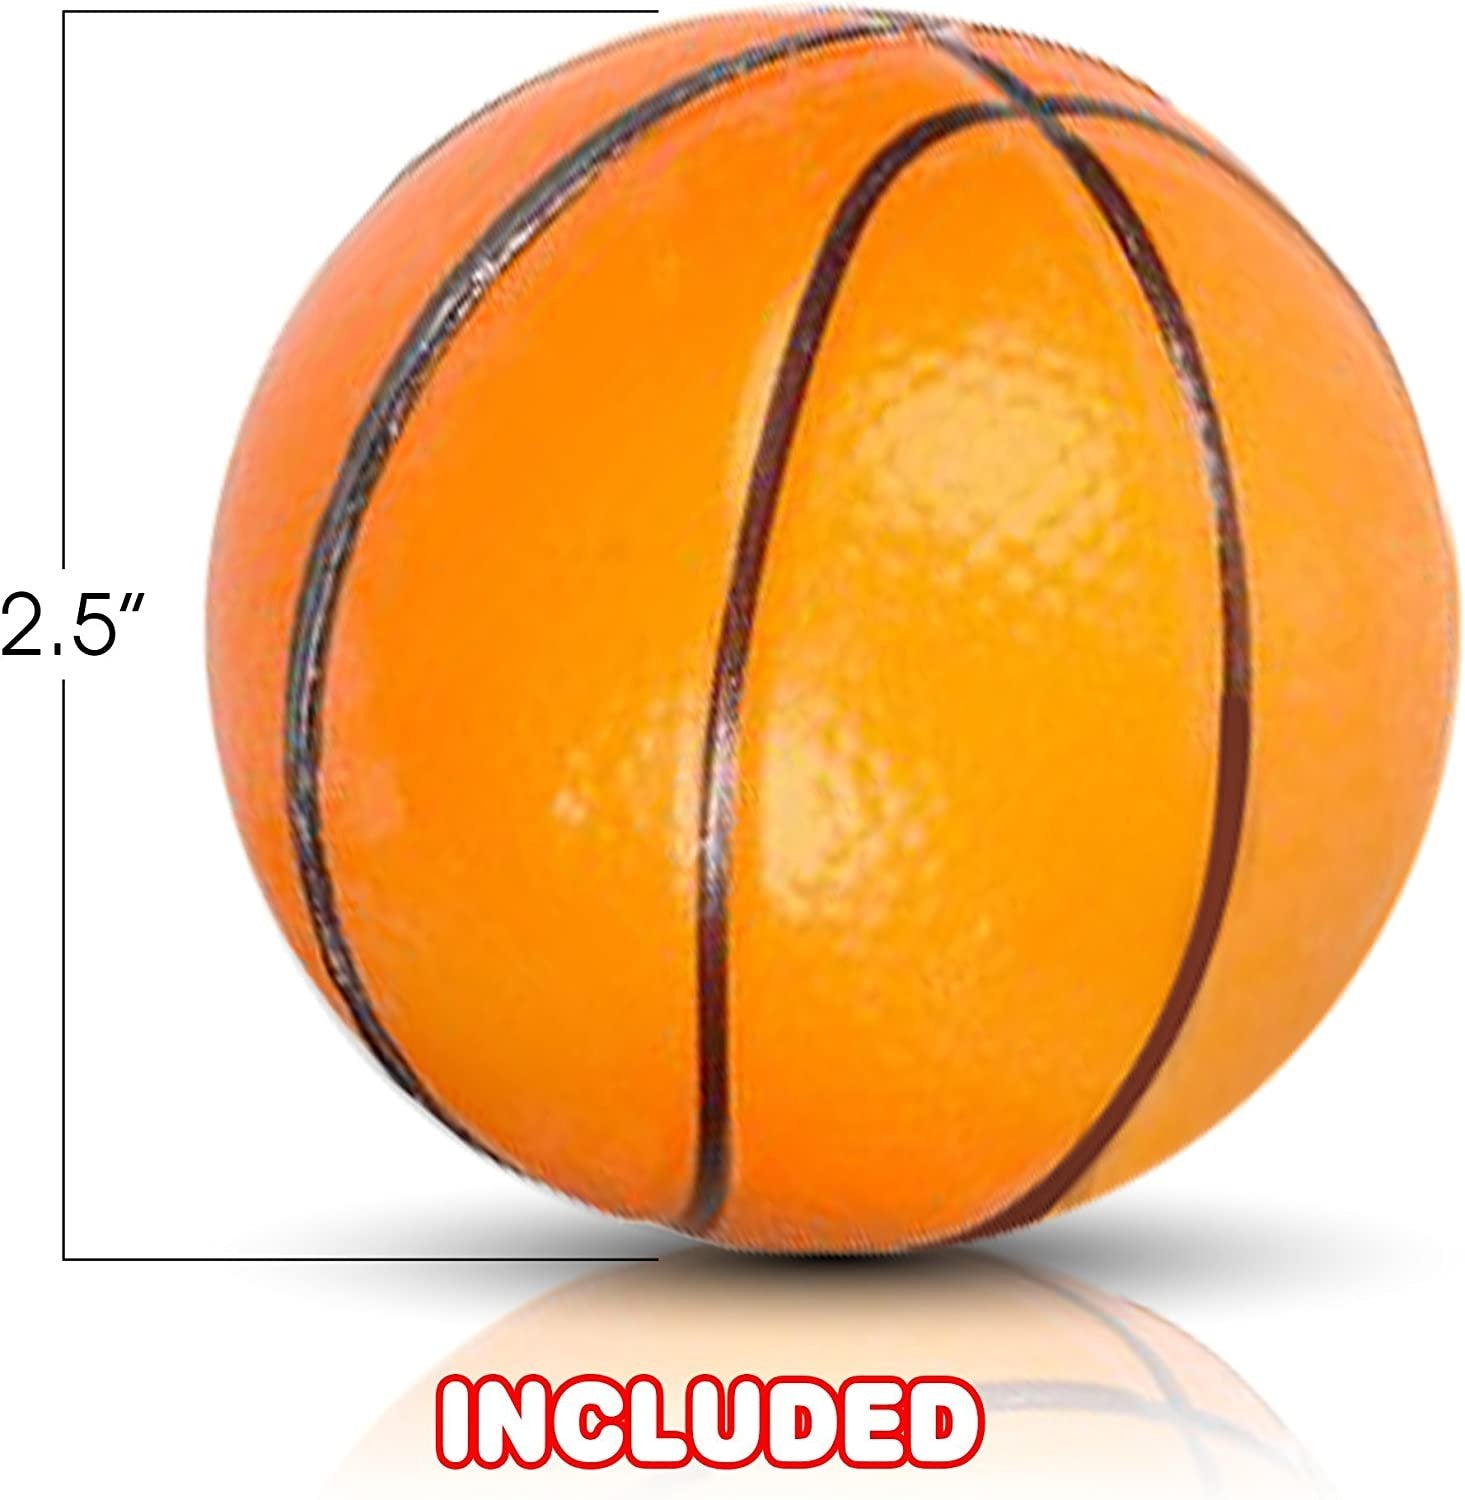 Sports Stress Foam Balls for Kids - Set of 4 - Includes Basketball, Football, Baseball, and Soccer Squeezable Anxiety Relief Balls Idea, Party Favor for Boys or Girls